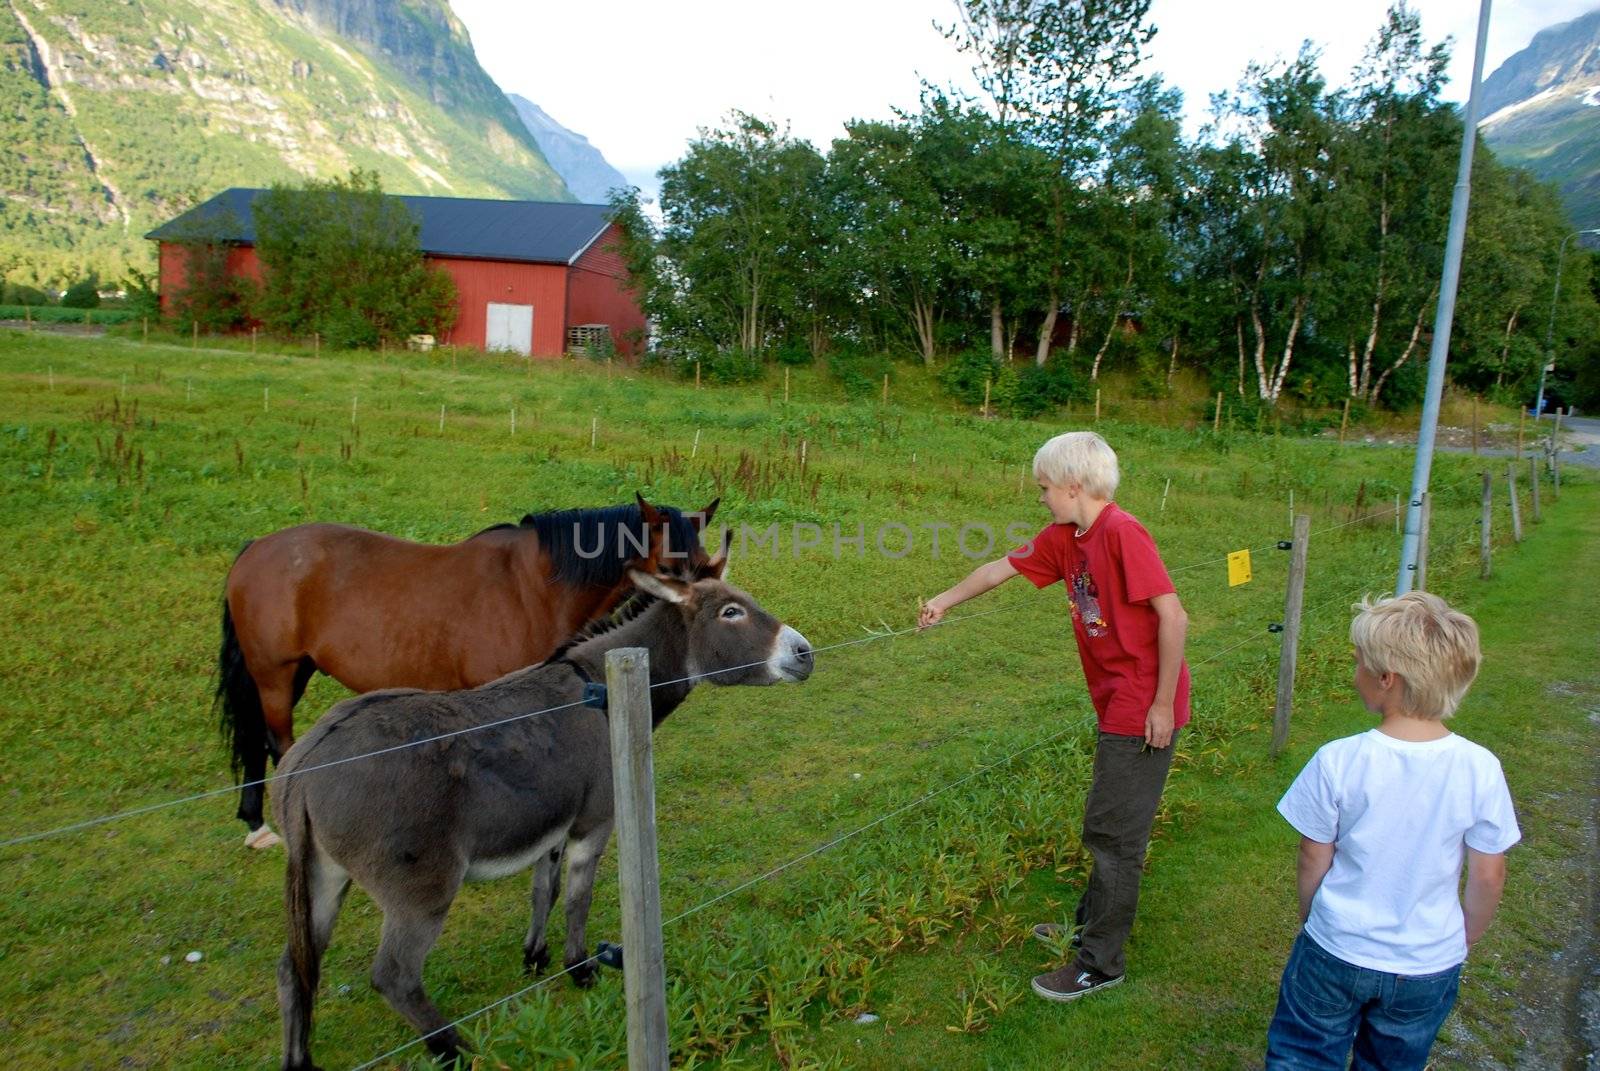 children feeding the horses. Please note: No negative use allowed.